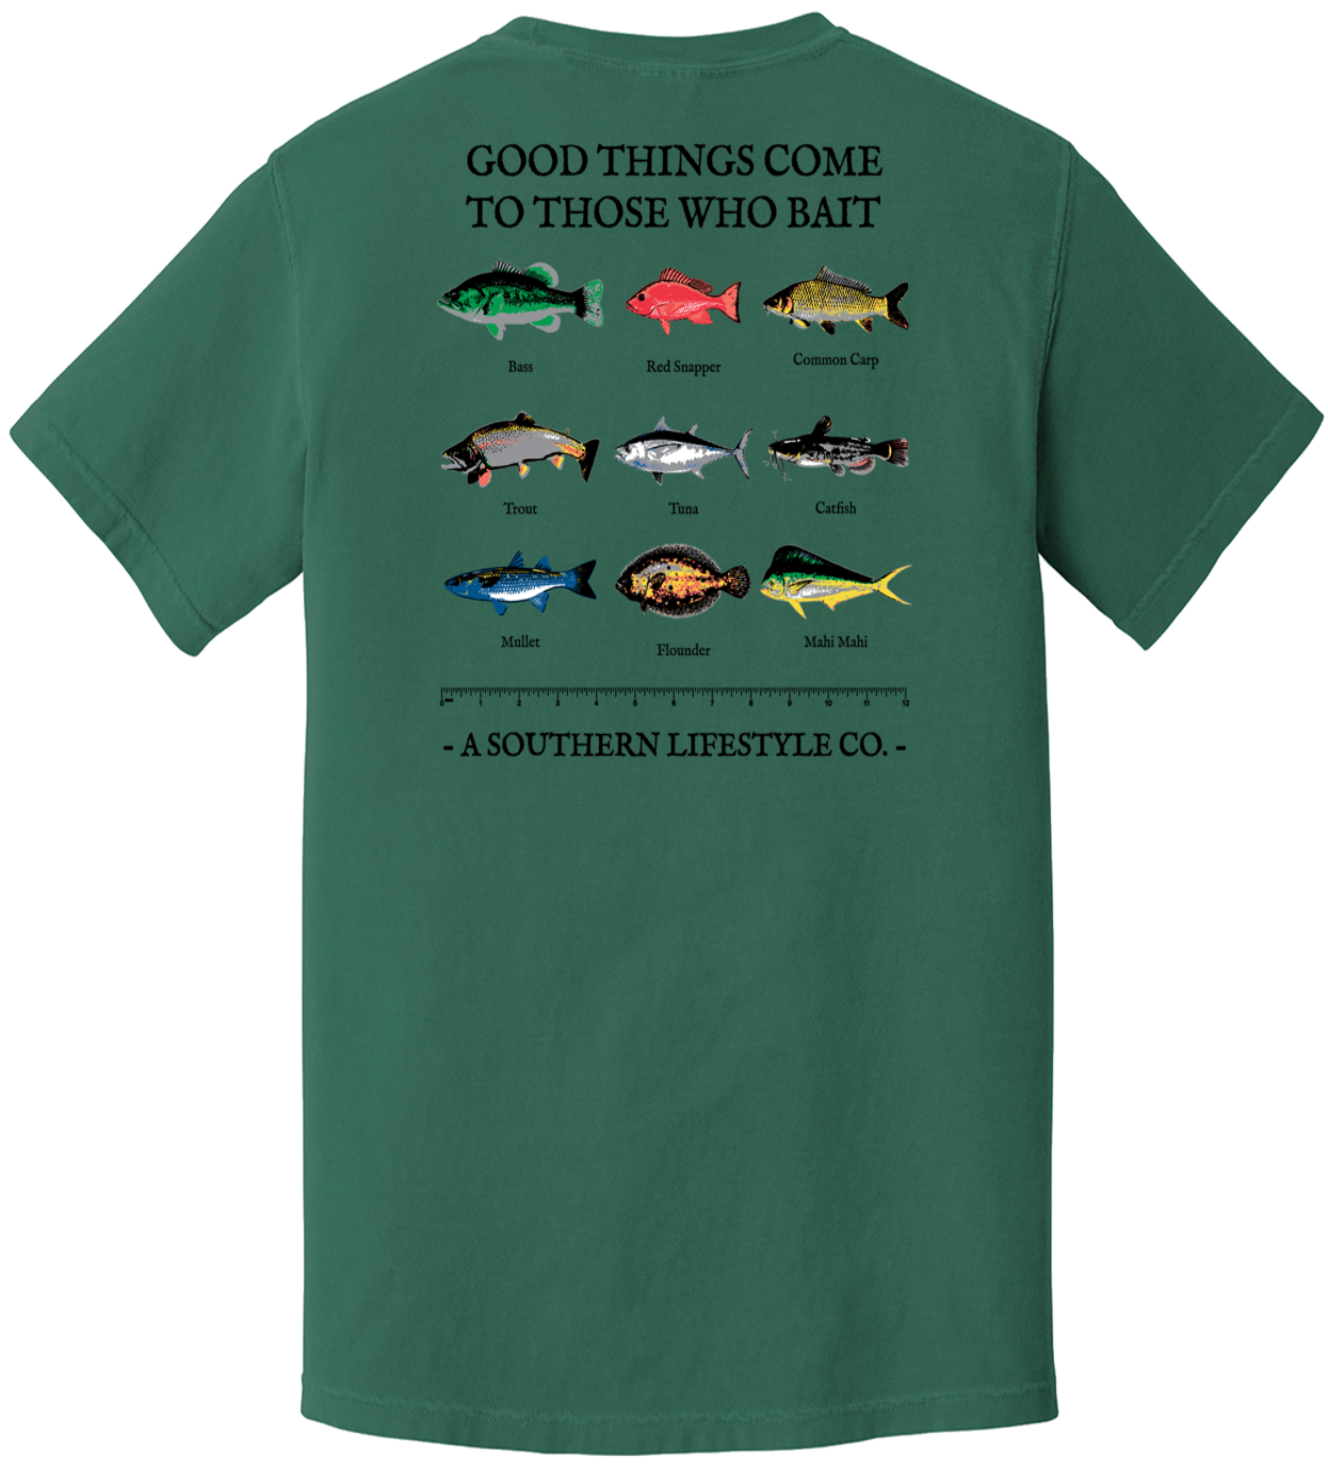 Those Who Bait Short Sleeve Tee A Southern Lifestyle Co